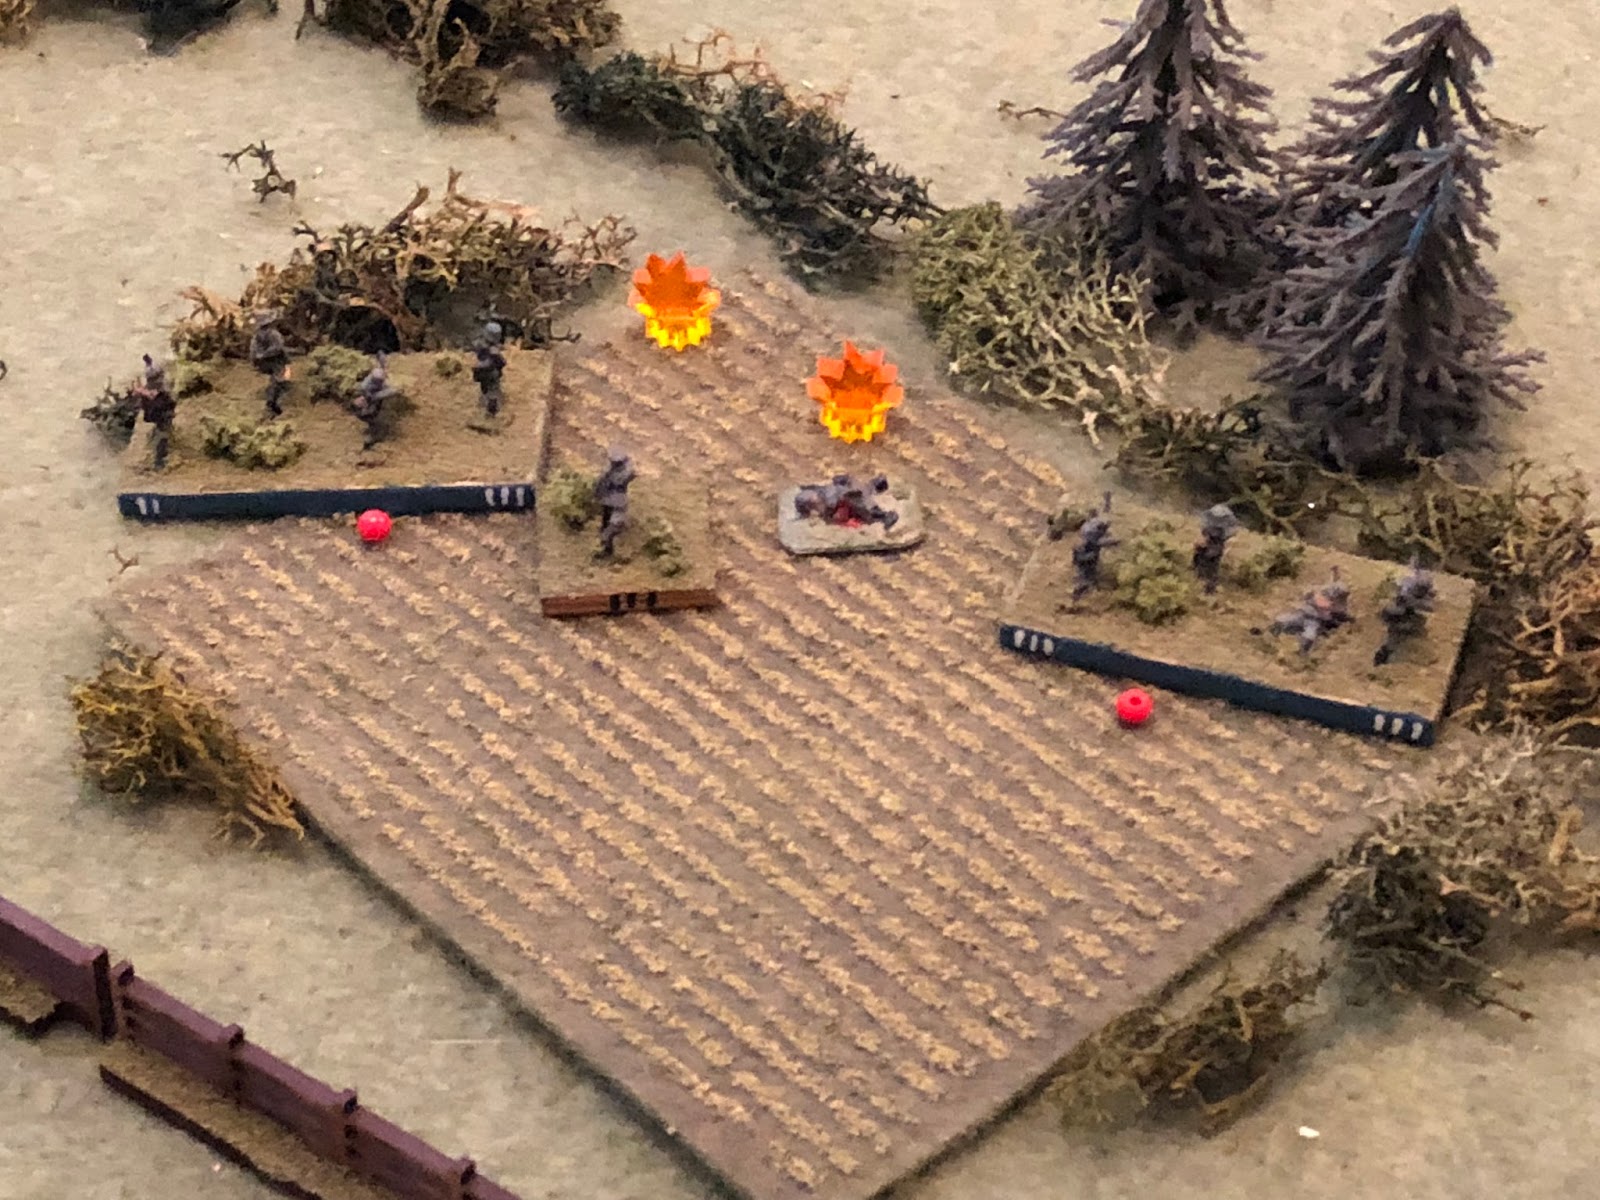  And the fire is vicious!&nbsp; Sgt Imhofe's squad is eliminated, while Sgt Kandler and Cpl Rishel's squads are both suppressed!  *Ouch!&nbsp; Good dice, but helped by the fact the French were firing down on the Germans, who were essentially in the o